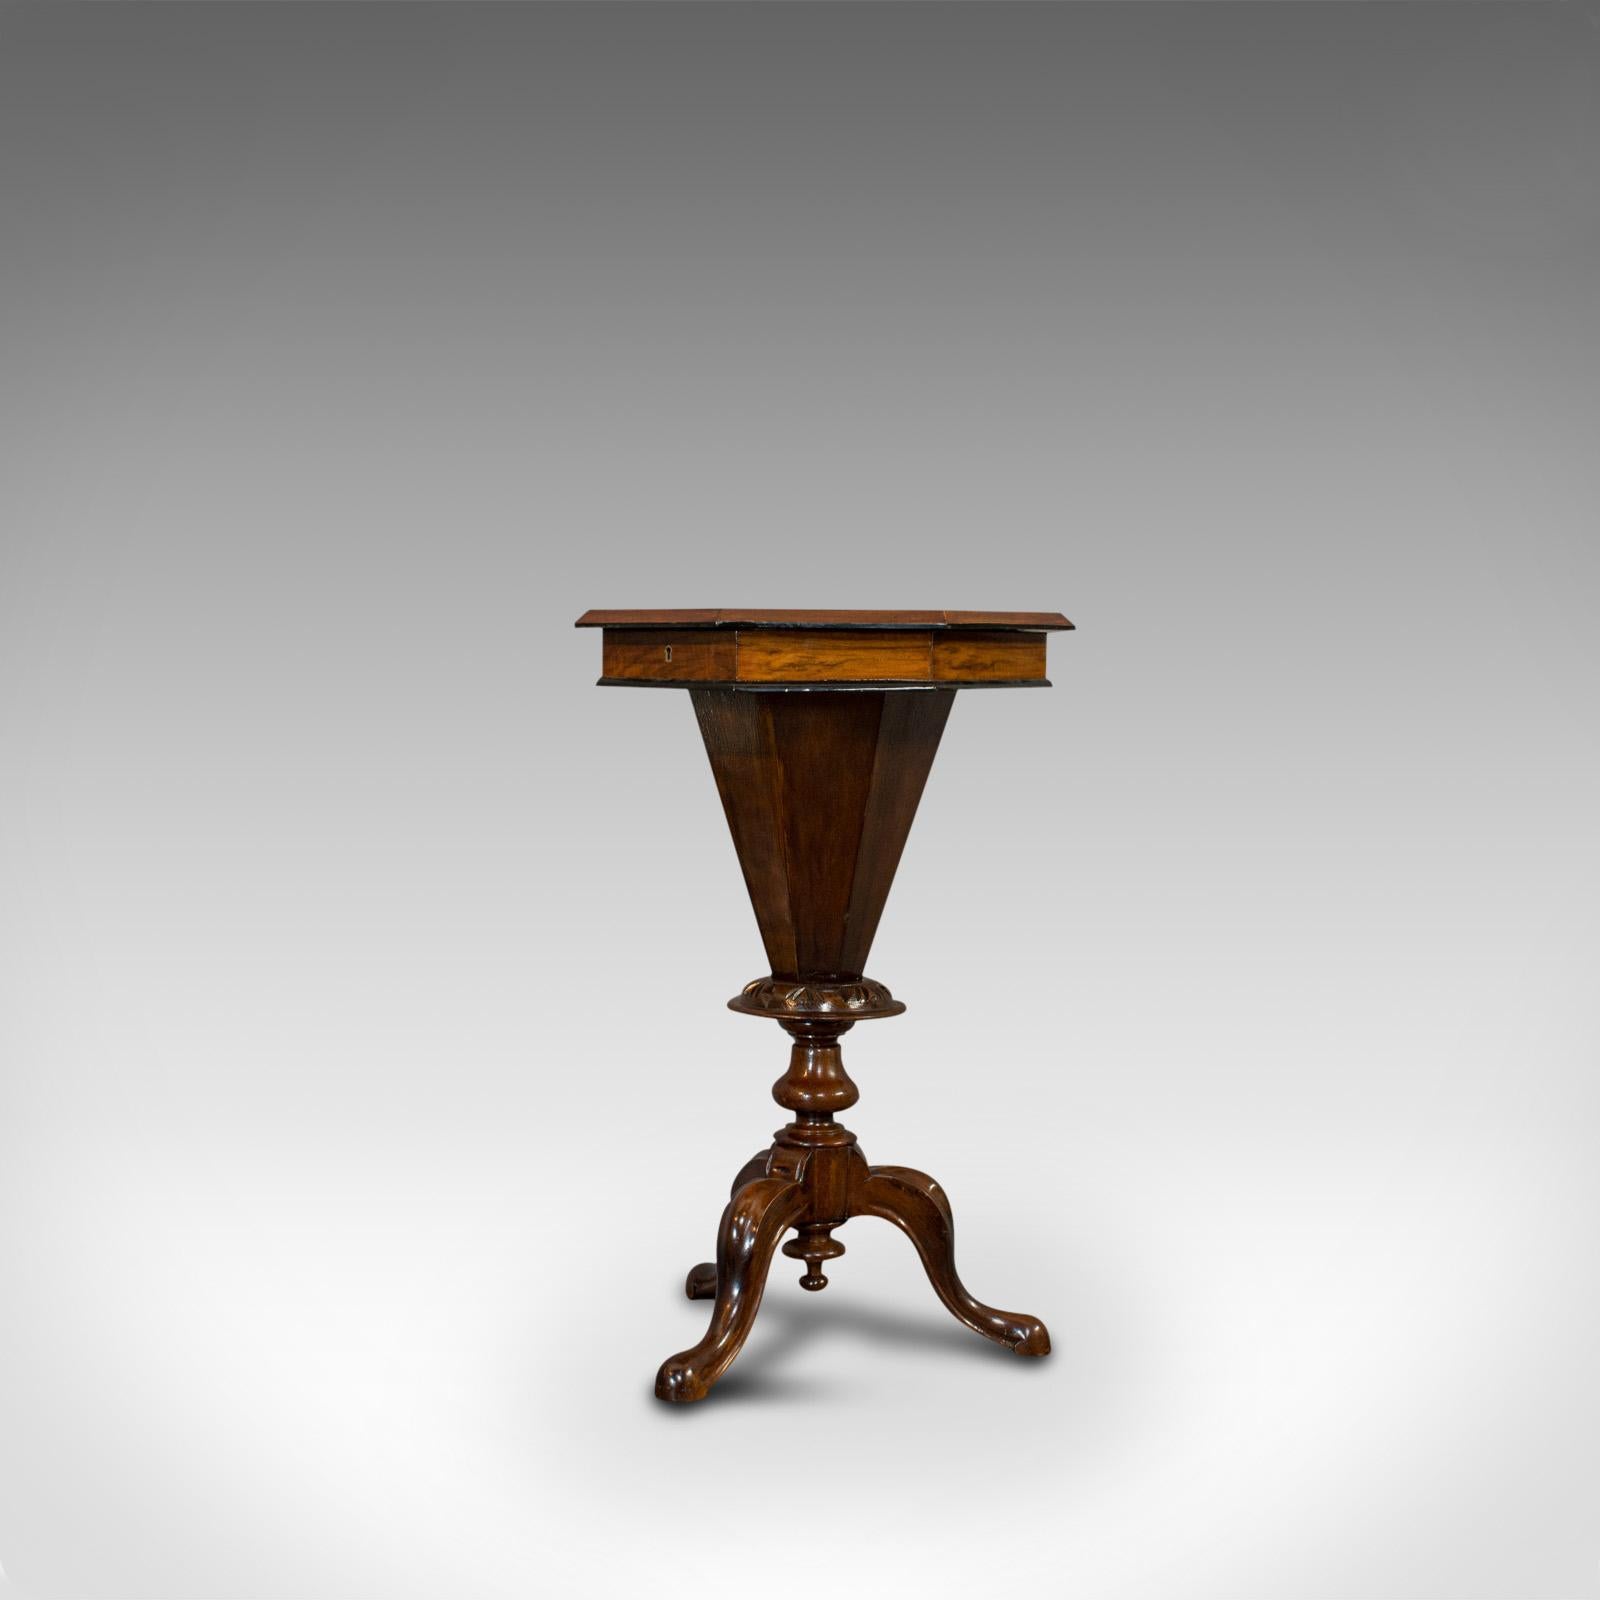 19th Century Antique Trumpet Shape Games Table, Walnut, Chess Board, Sewing, Victorian, 1890